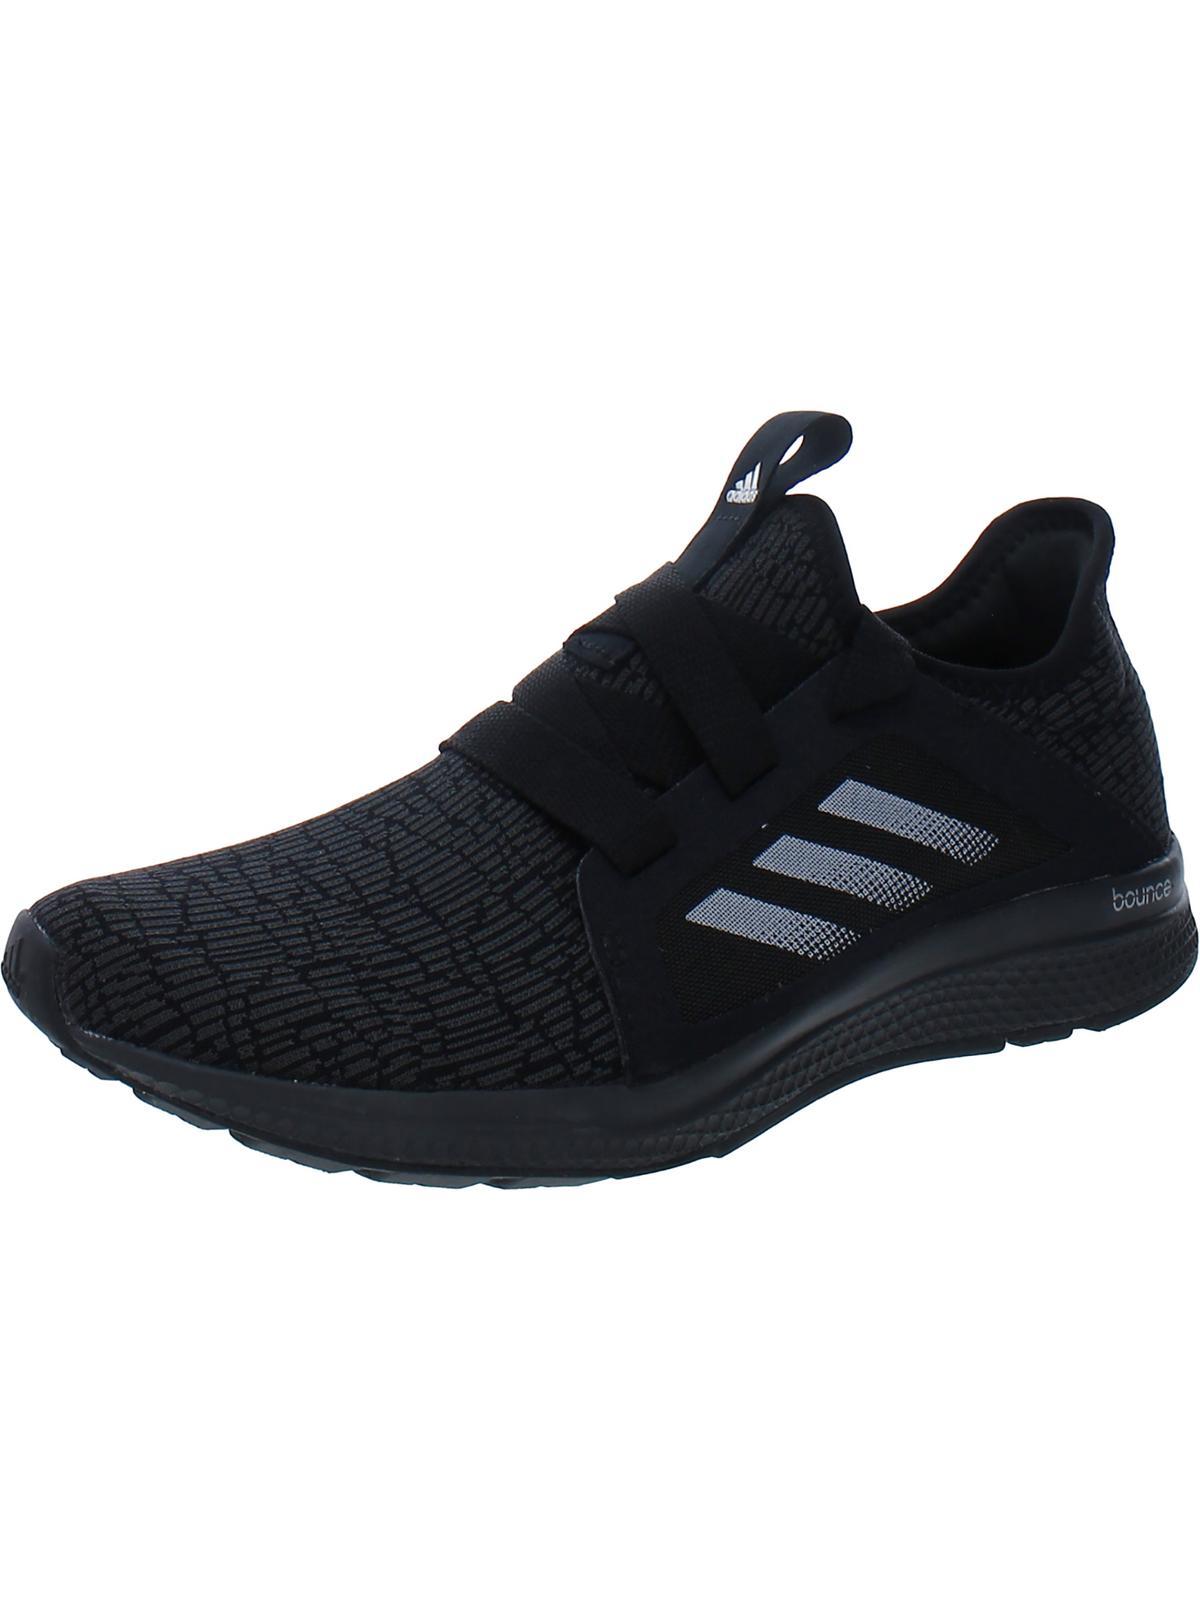 adidas Edge Lux Fitness Gym Running Shoes in Black | Lyst